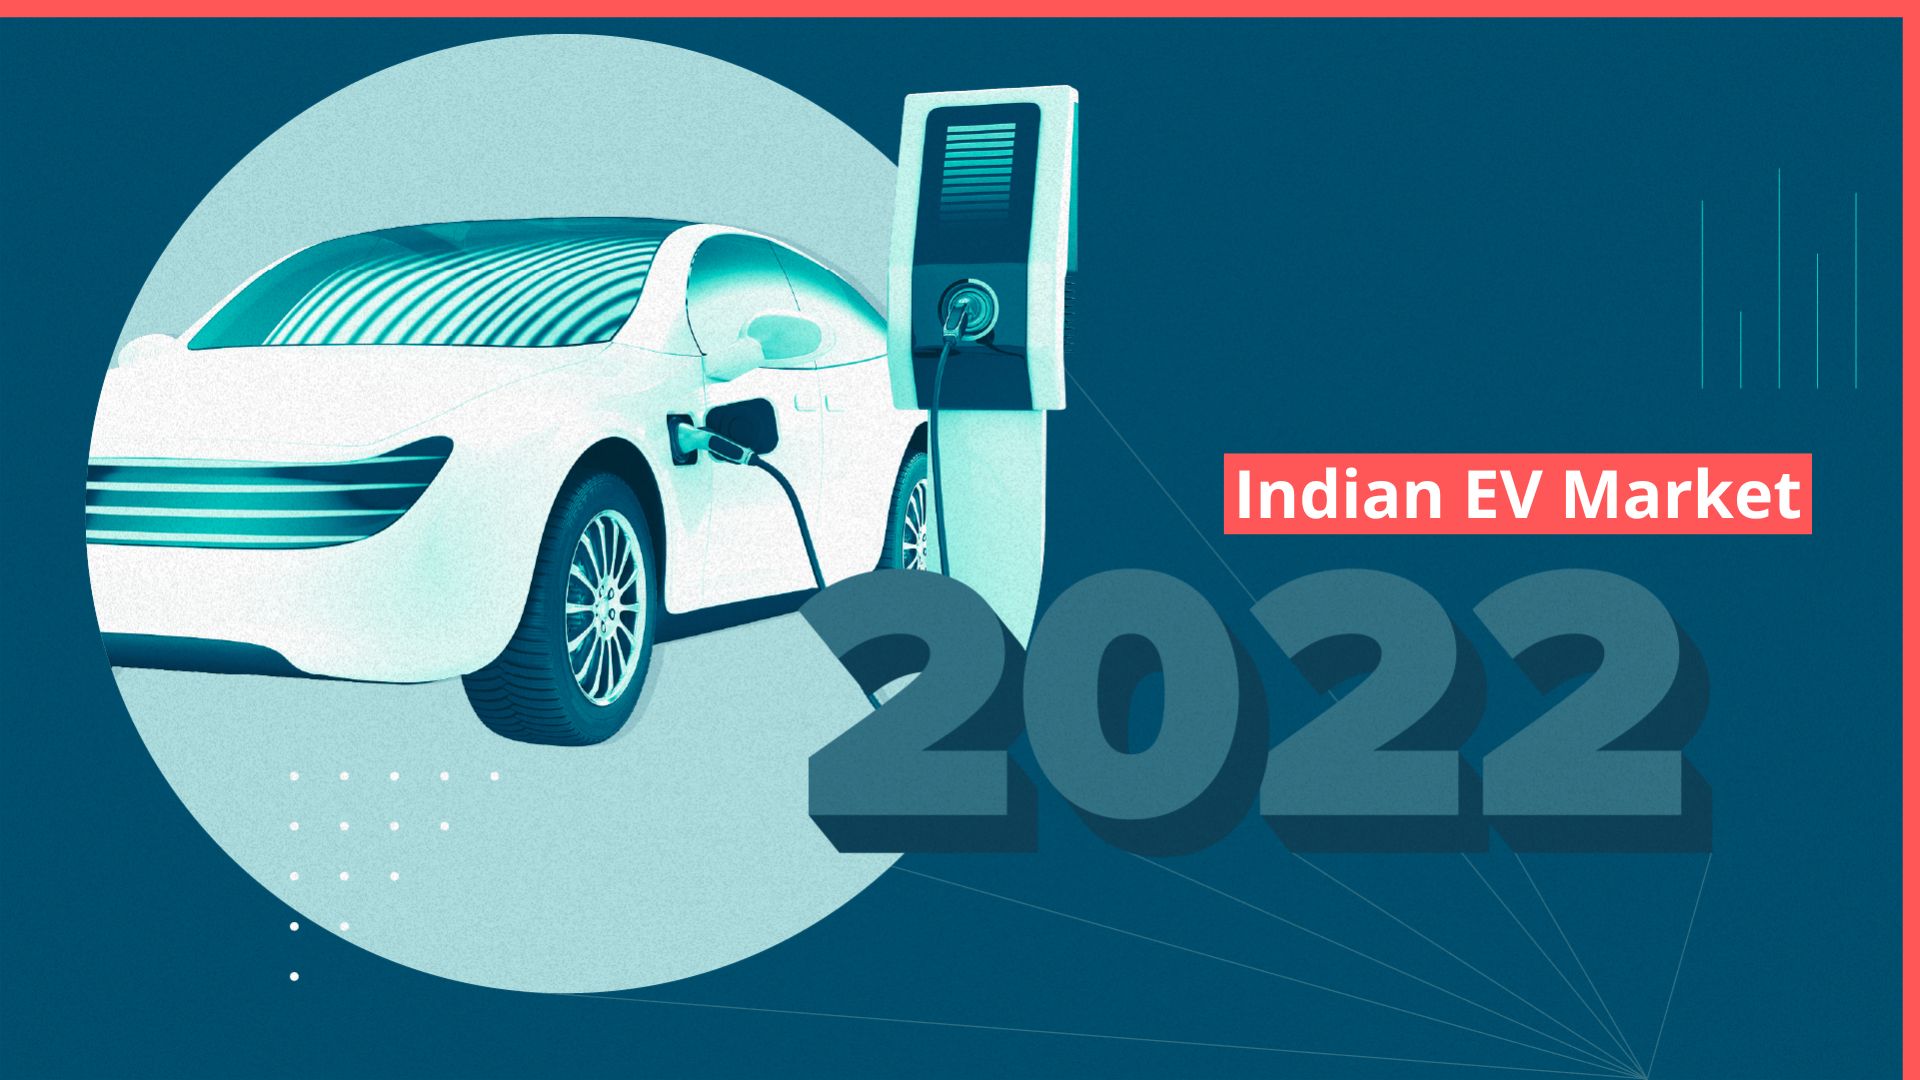 https://e-vehicleinfo.com/india-ev-market-to-grow-at-cagr-of-49-between-2021-2030/